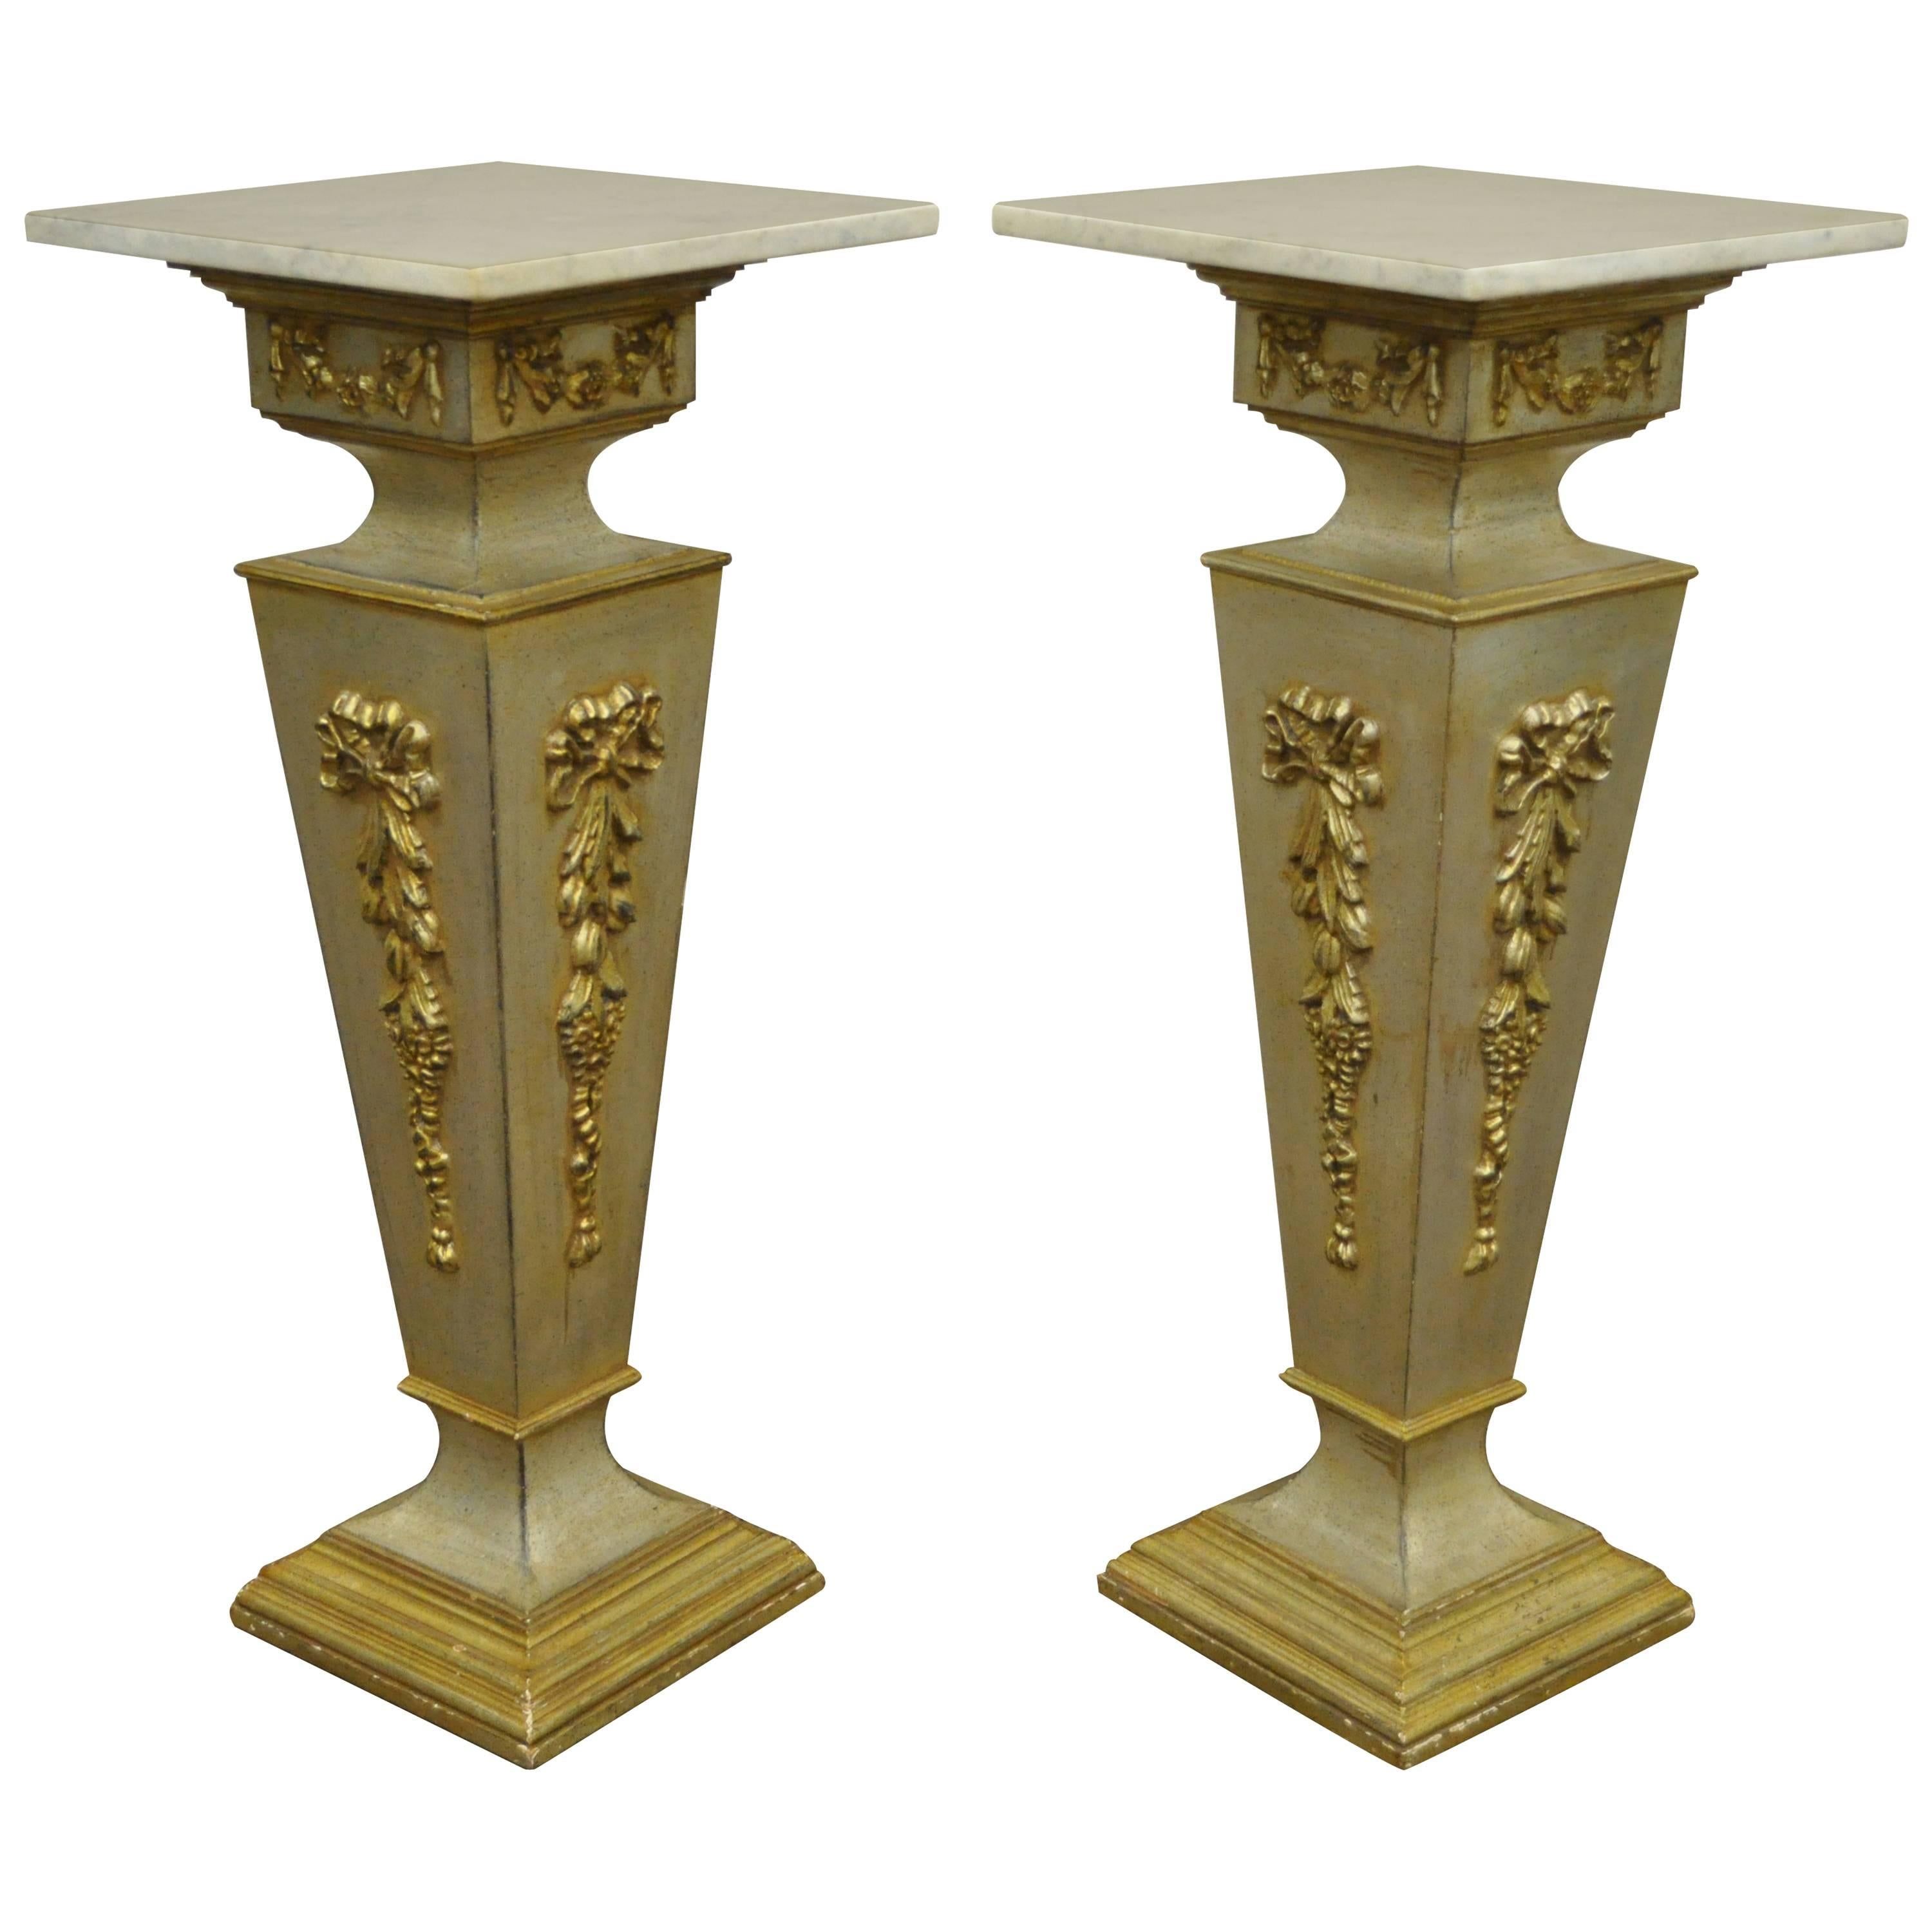 Pair of 20th Century Italian Florentine Marble Top Pedestals or Bust Stands